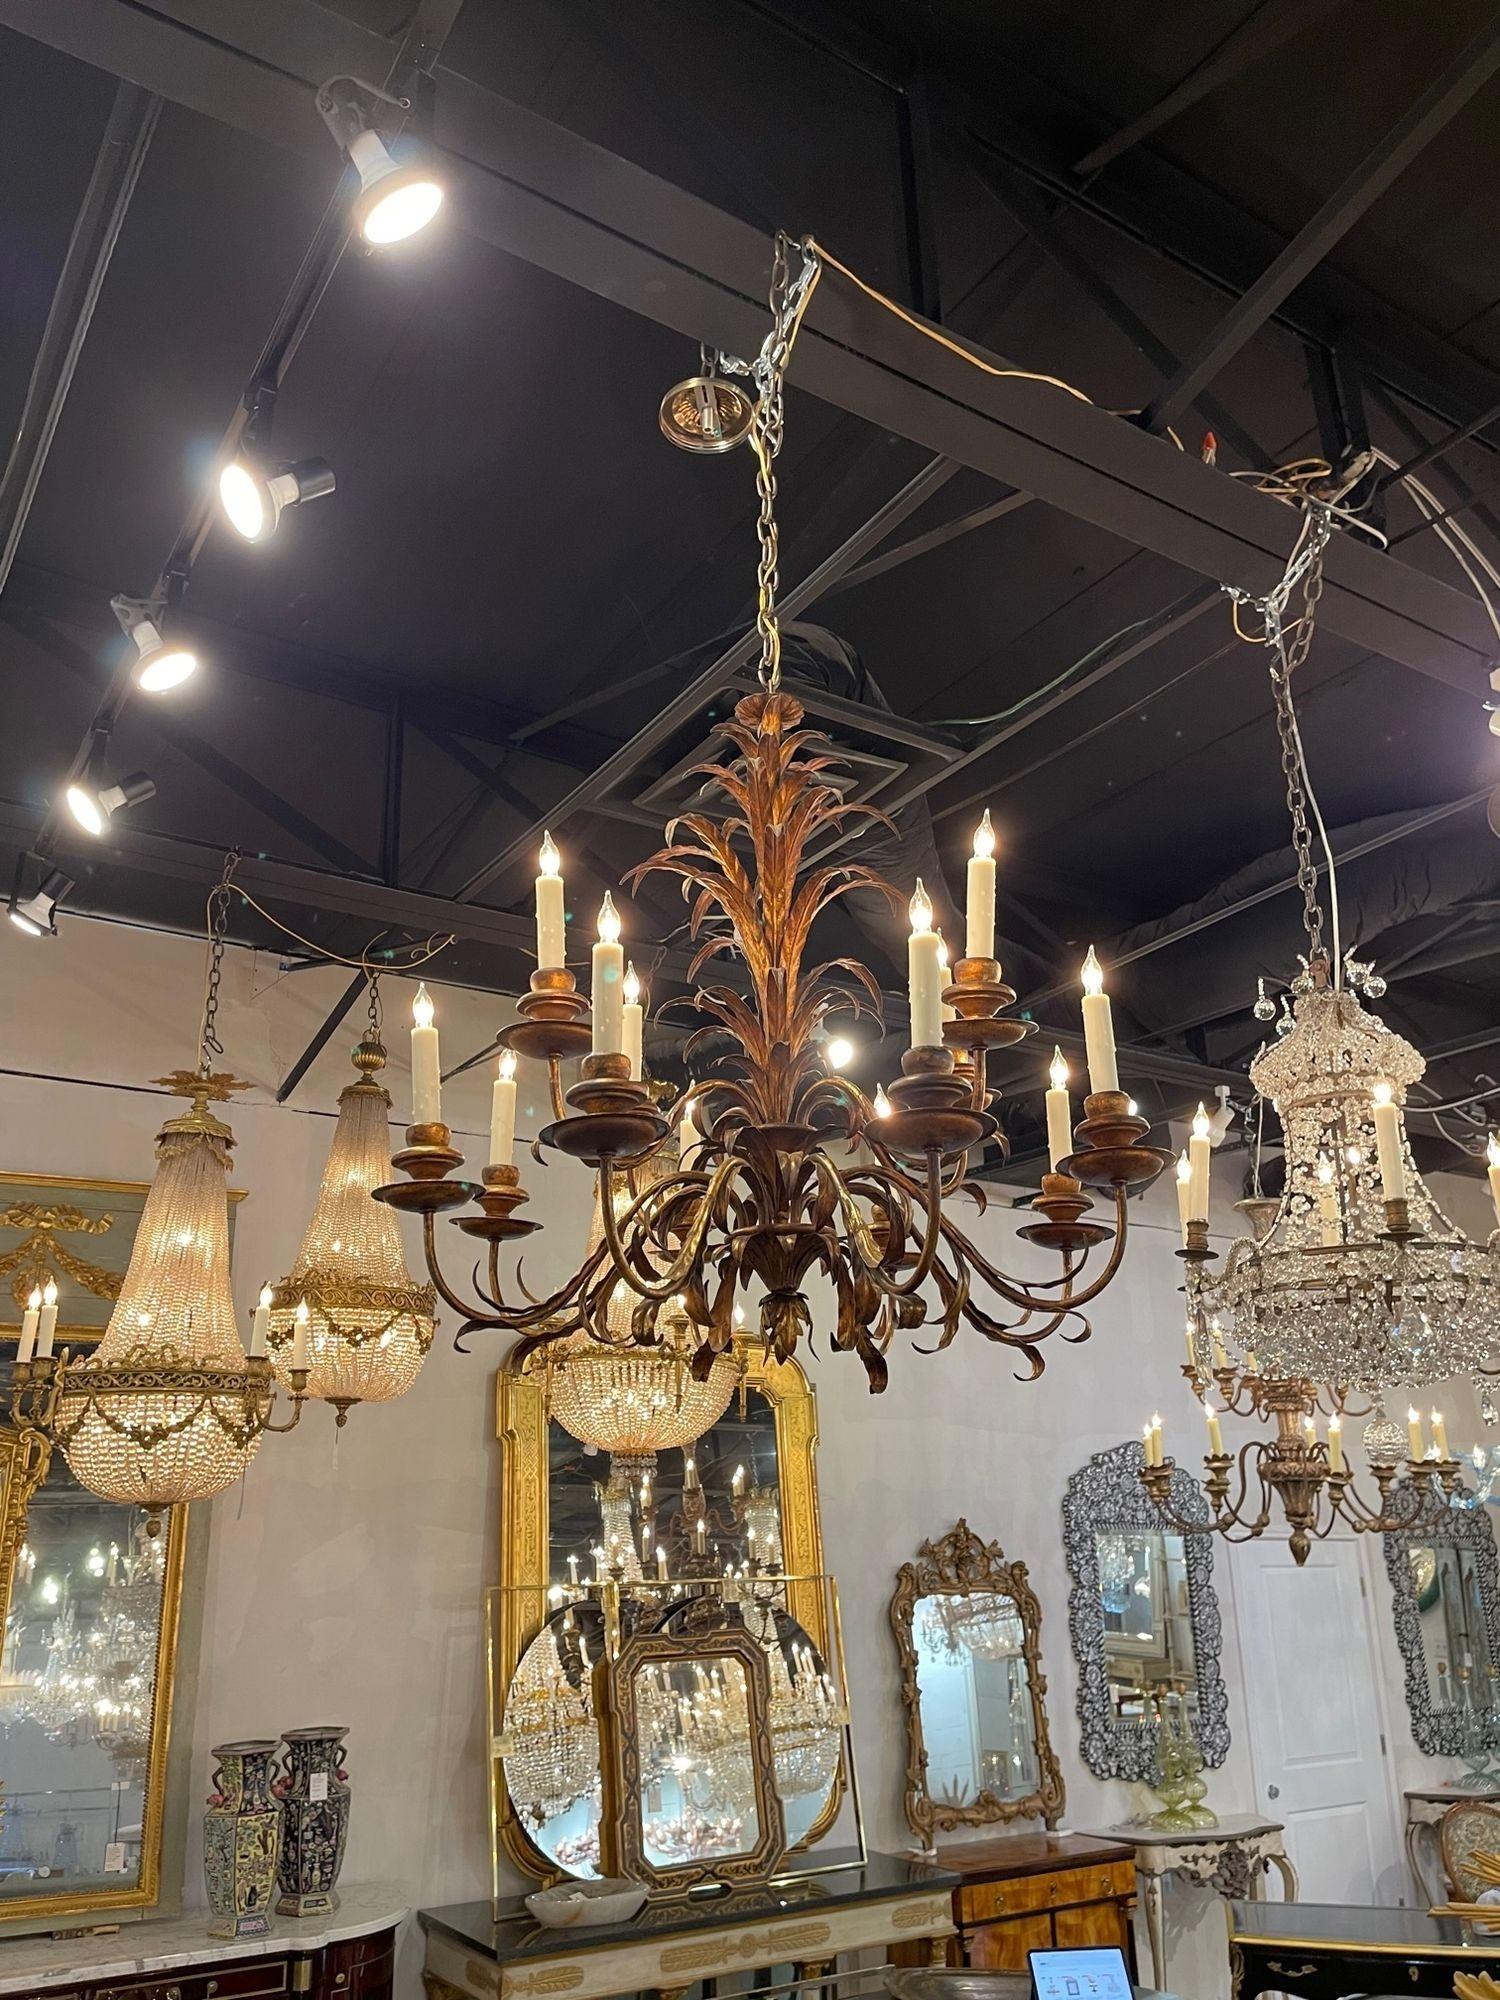 Very fine vintage gilt metal leaf form chandelier with 12 lights. Featuring cascading gold leaves on the base and curved arms. Makes an impressive statement!